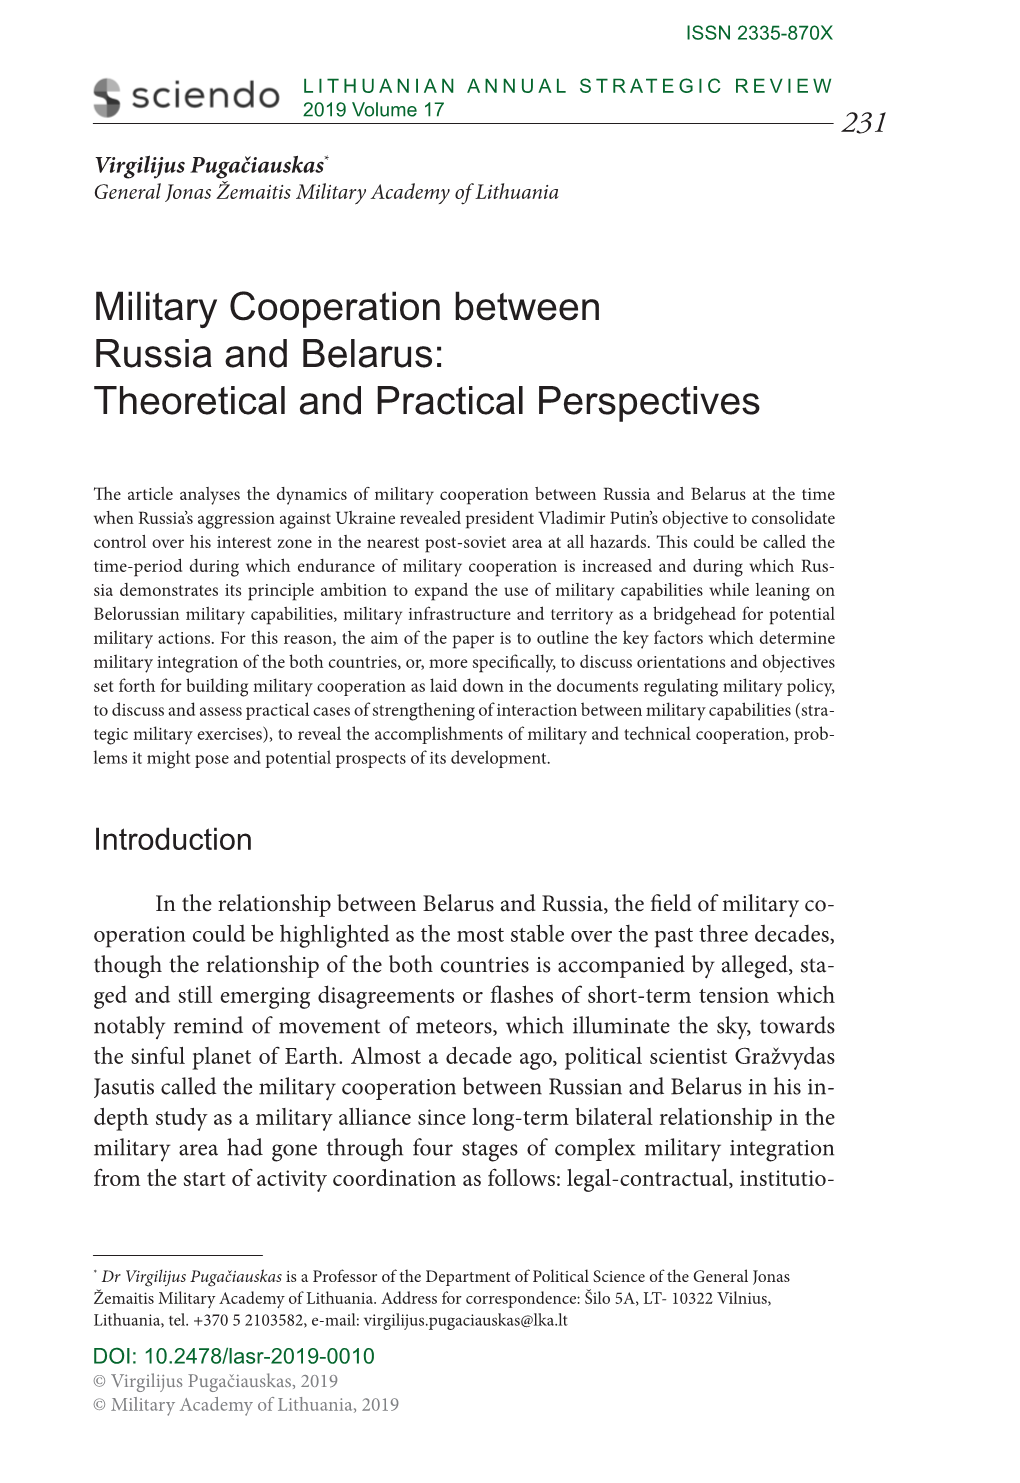 Military Cooperation Between Russia and Belarus: Theoretical and Practical Perspectives